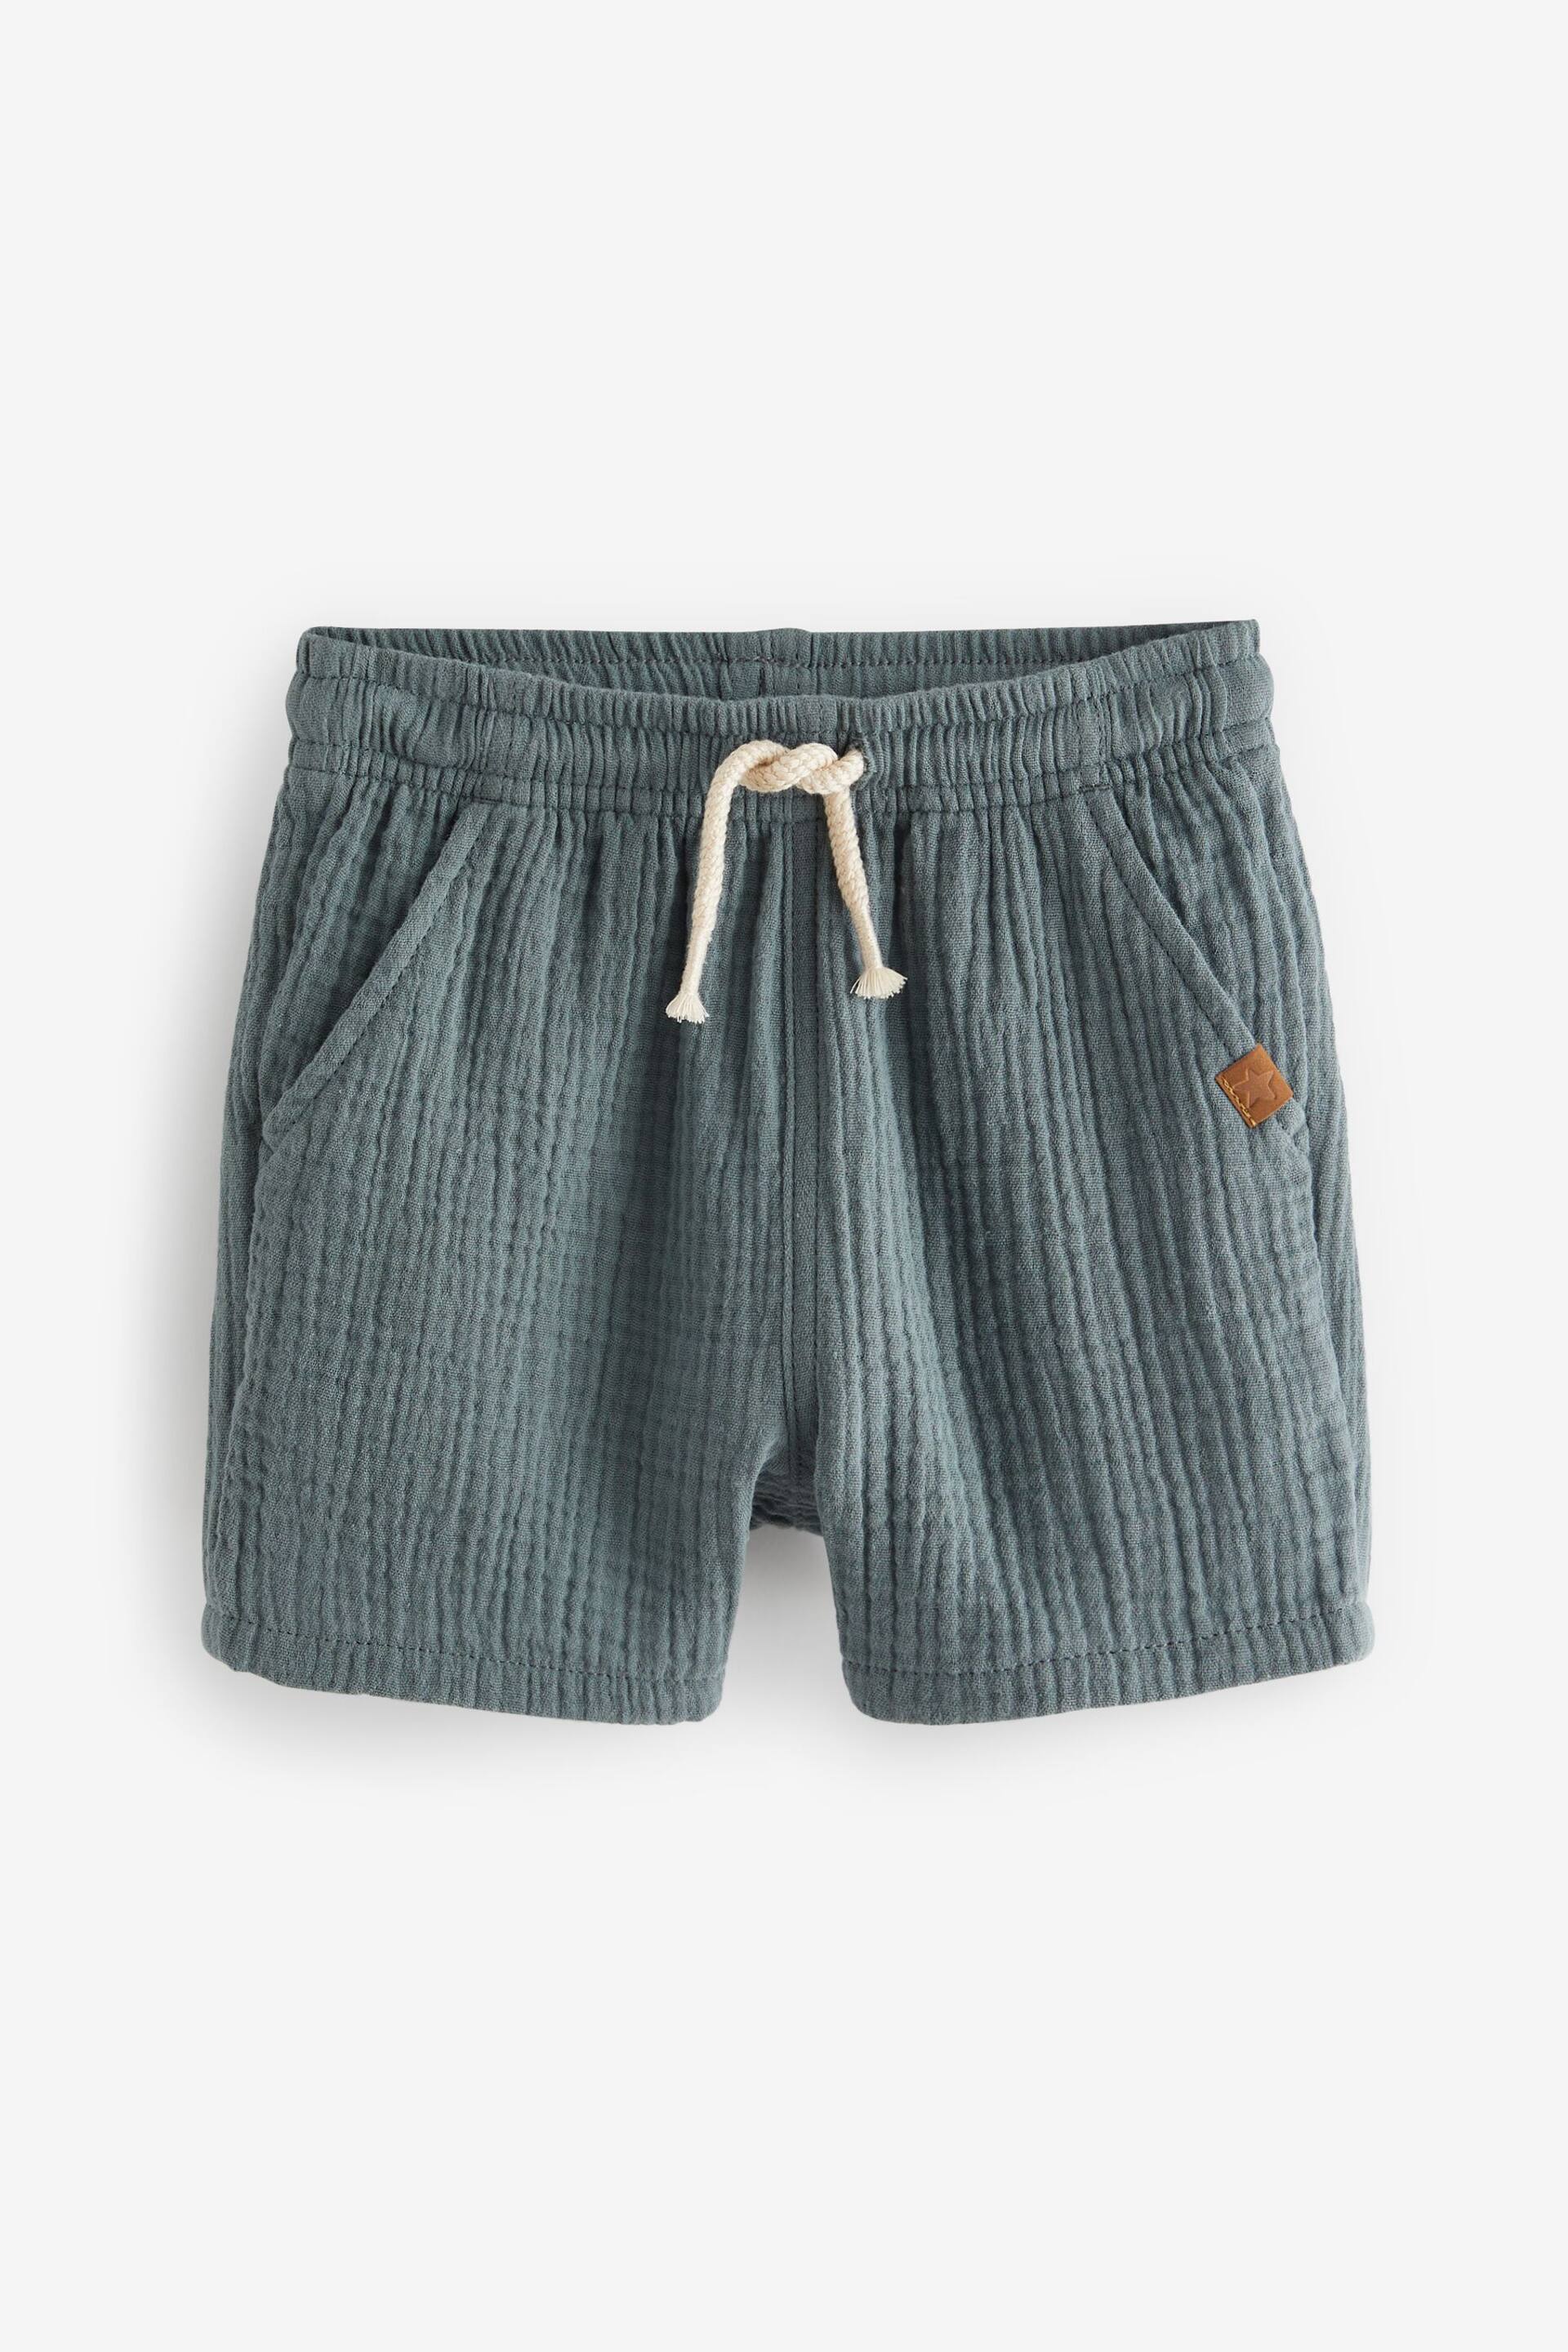 Blue Soft Textured Cotton Shorts (3mths-7yrs) - Image 5 of 7